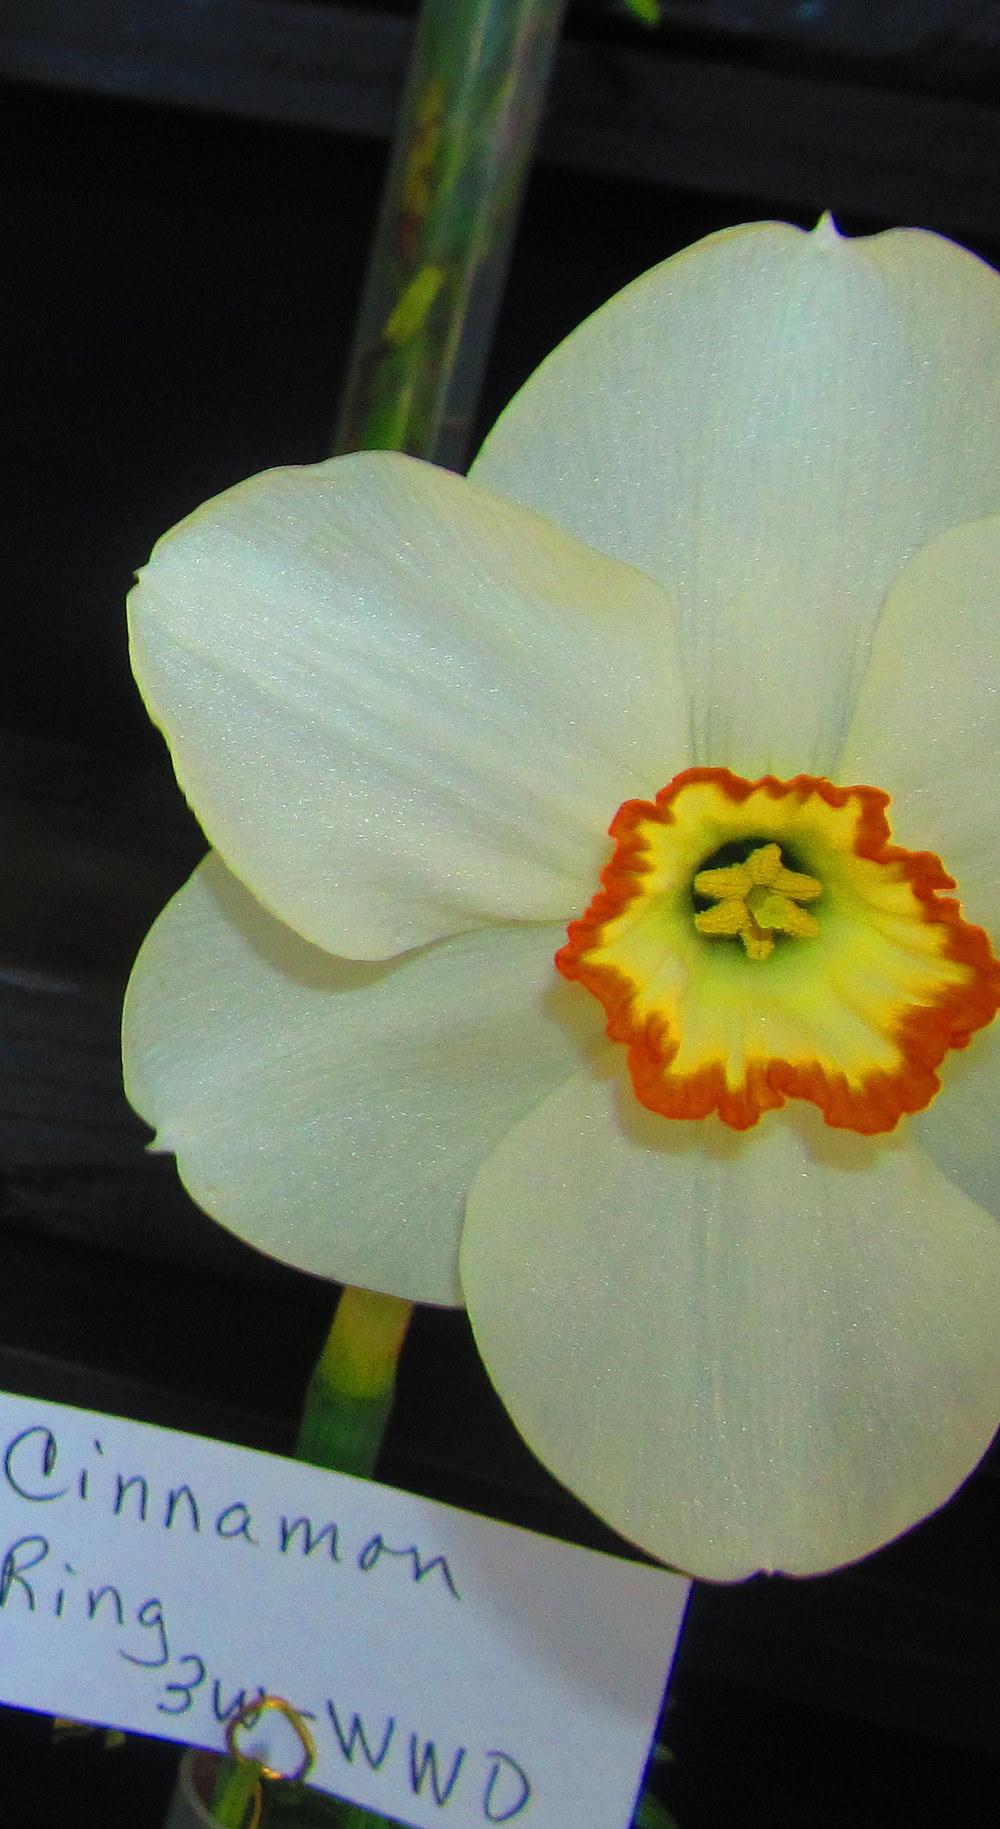 Photo of Small Cupped Daffodil (Narcissus 'Cinnamon Ring') uploaded by jmorth